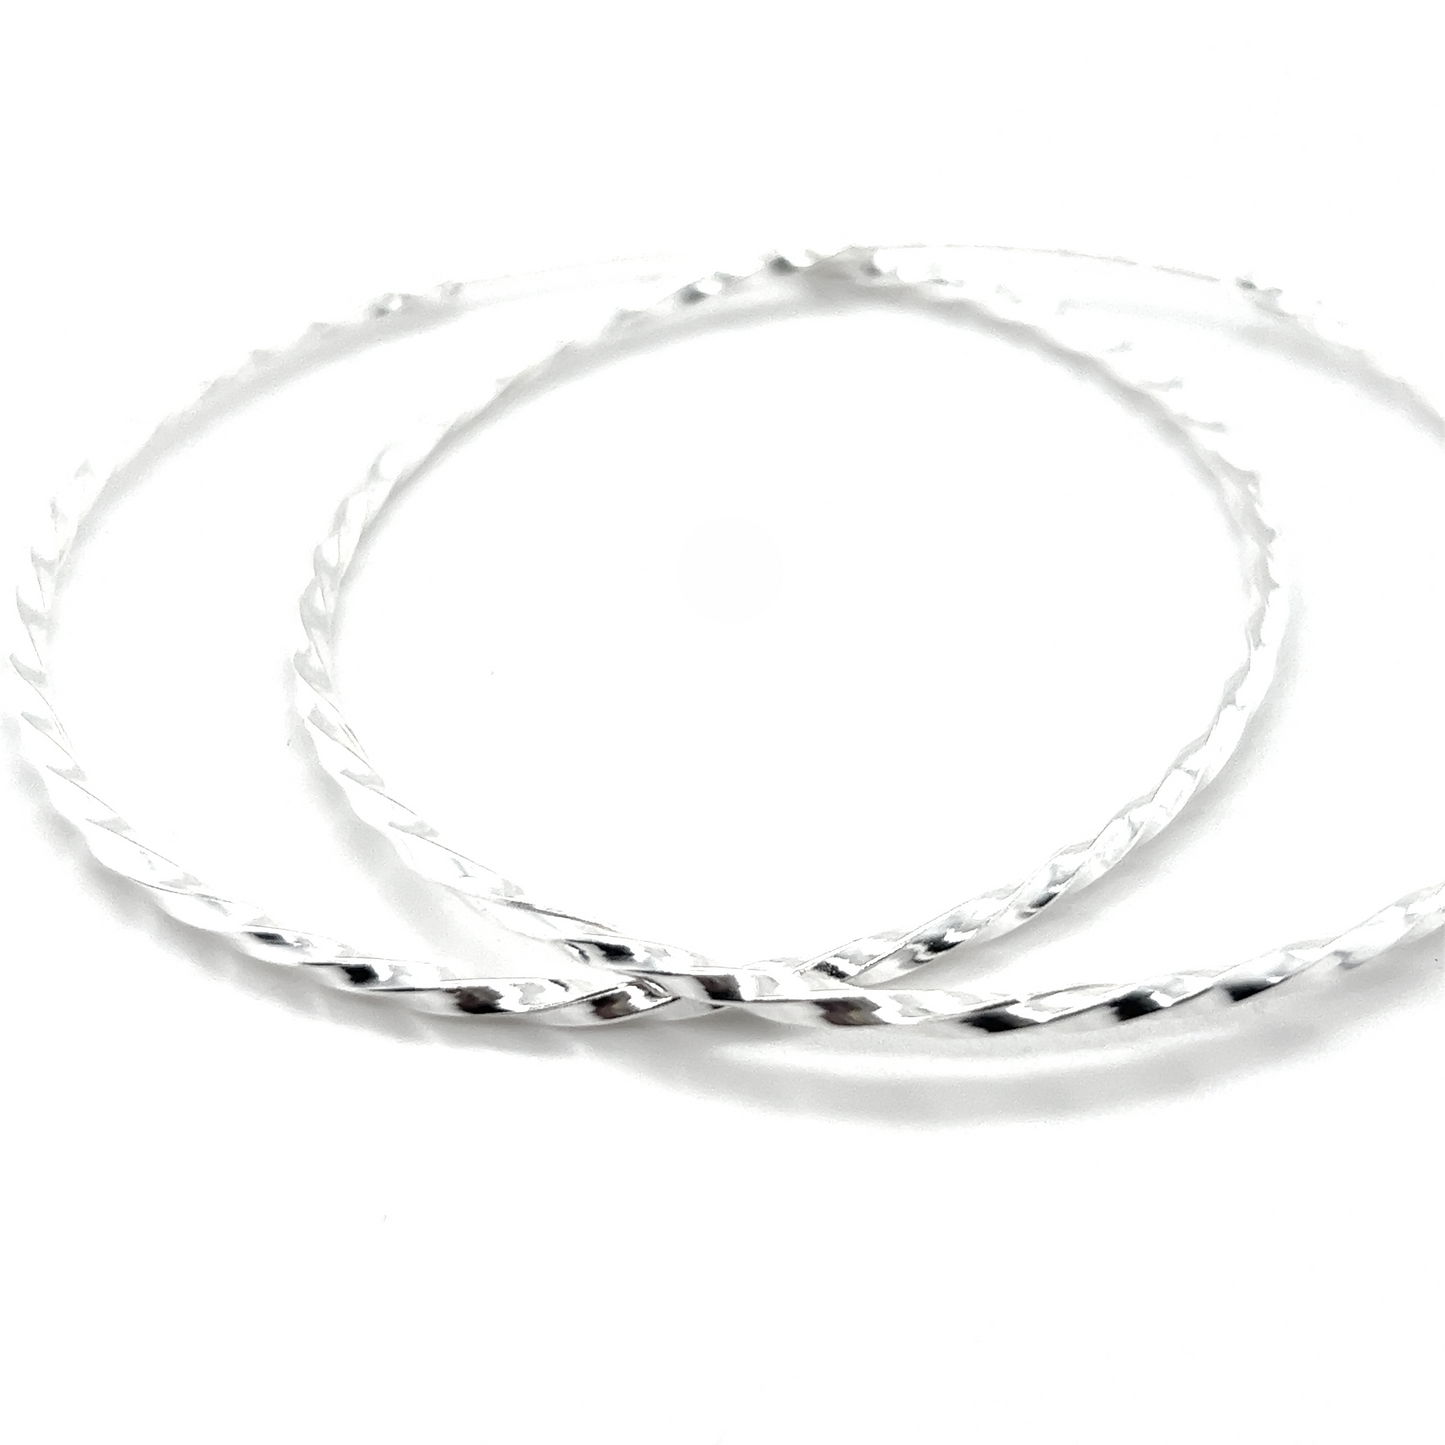 Two intertwined sterling silver 70mm Twisted Hoops on a white background.